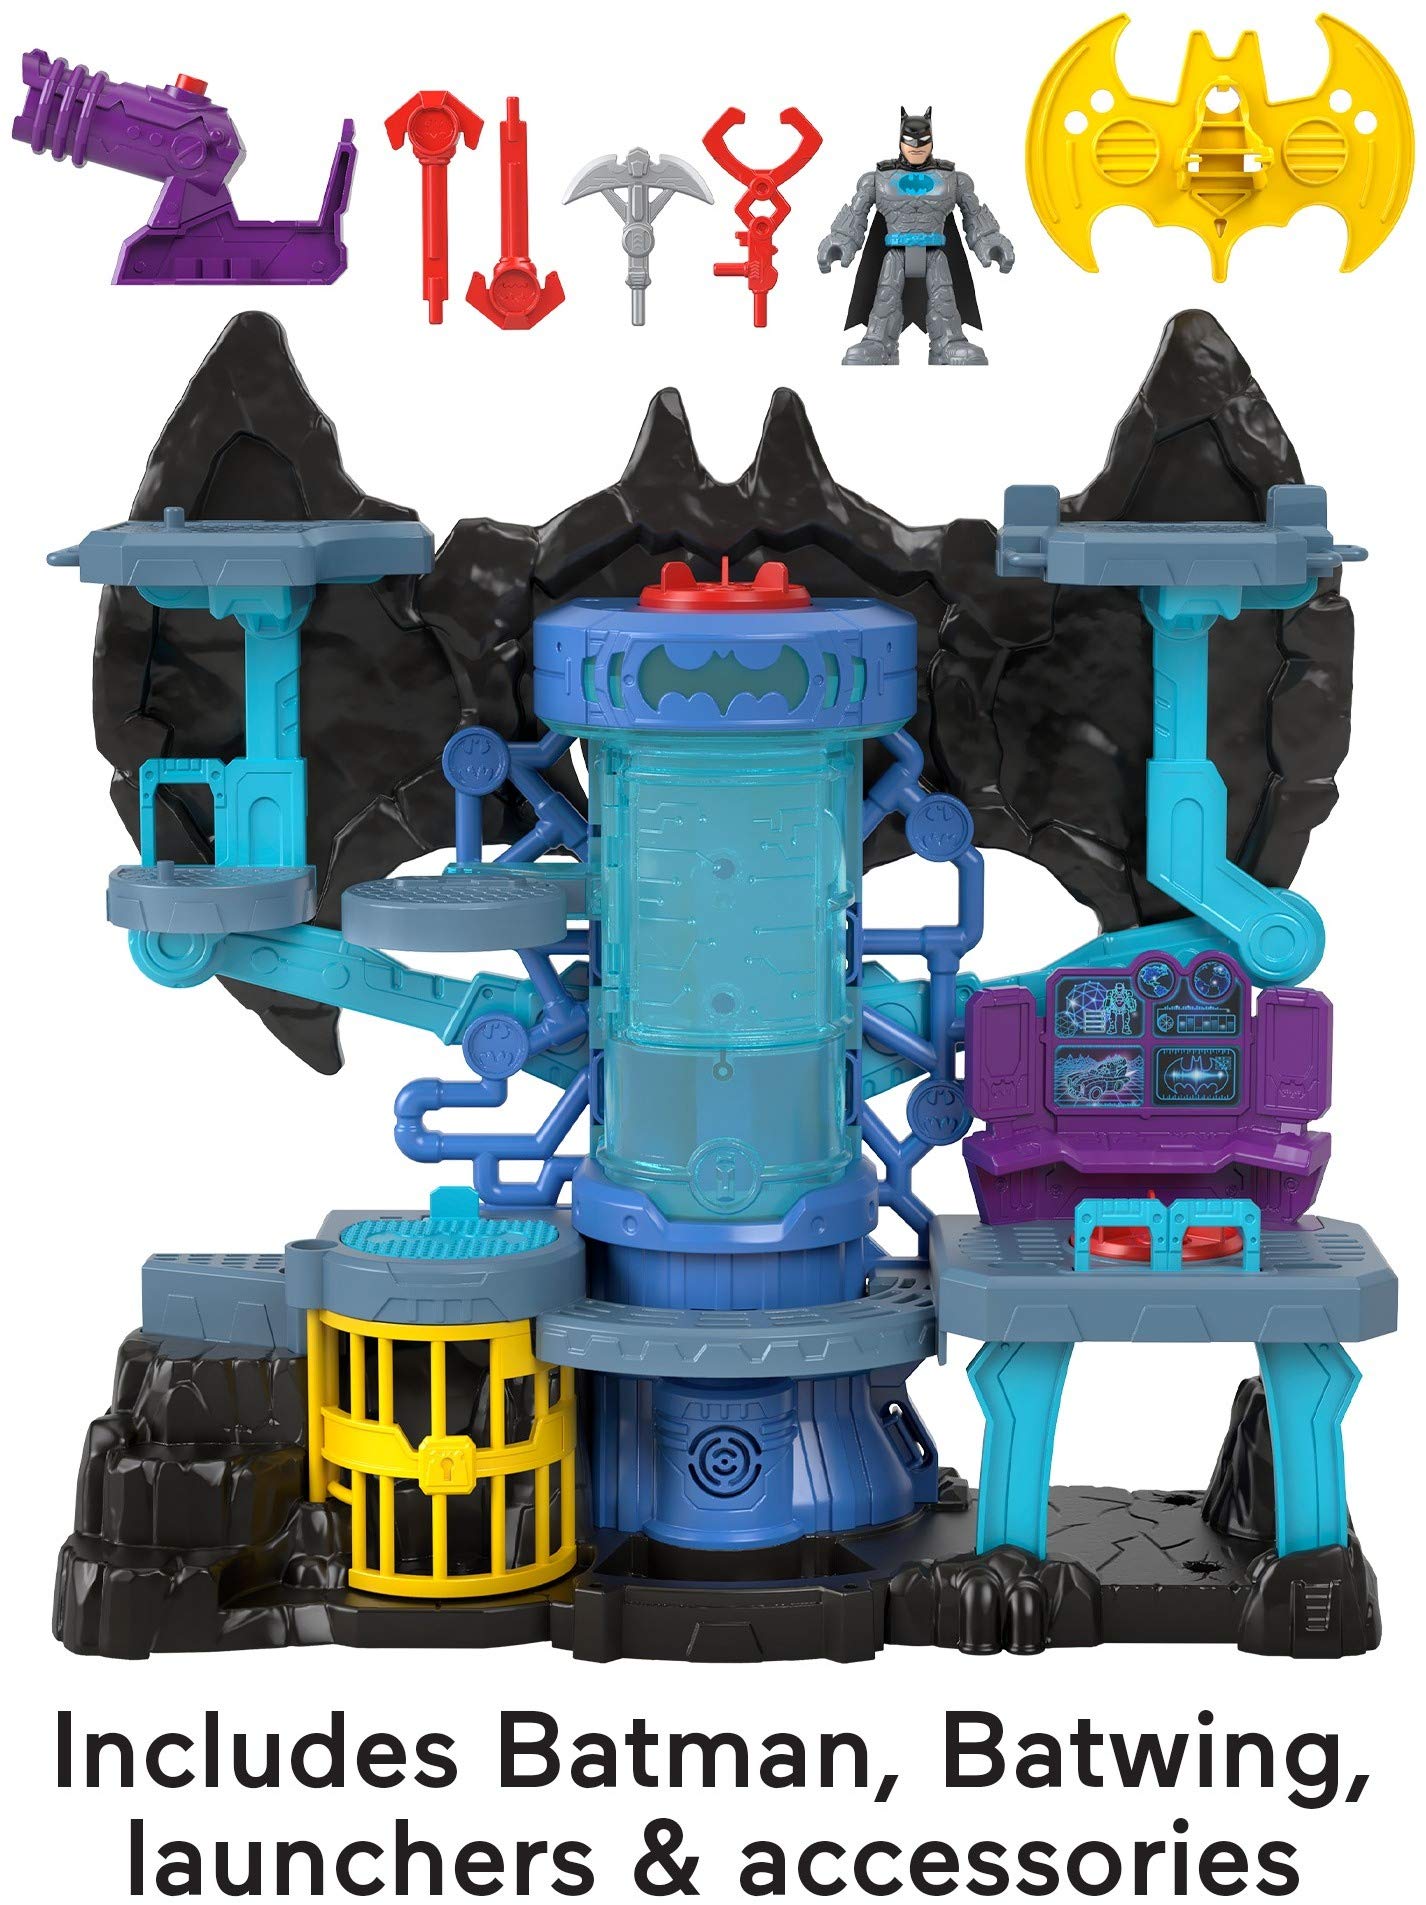 Fisher-Price Imaginext DC Super Friends Bat-Tech Batcave, Batman playset with Lights and Sounds for Kids Ages 3 to 8 Years